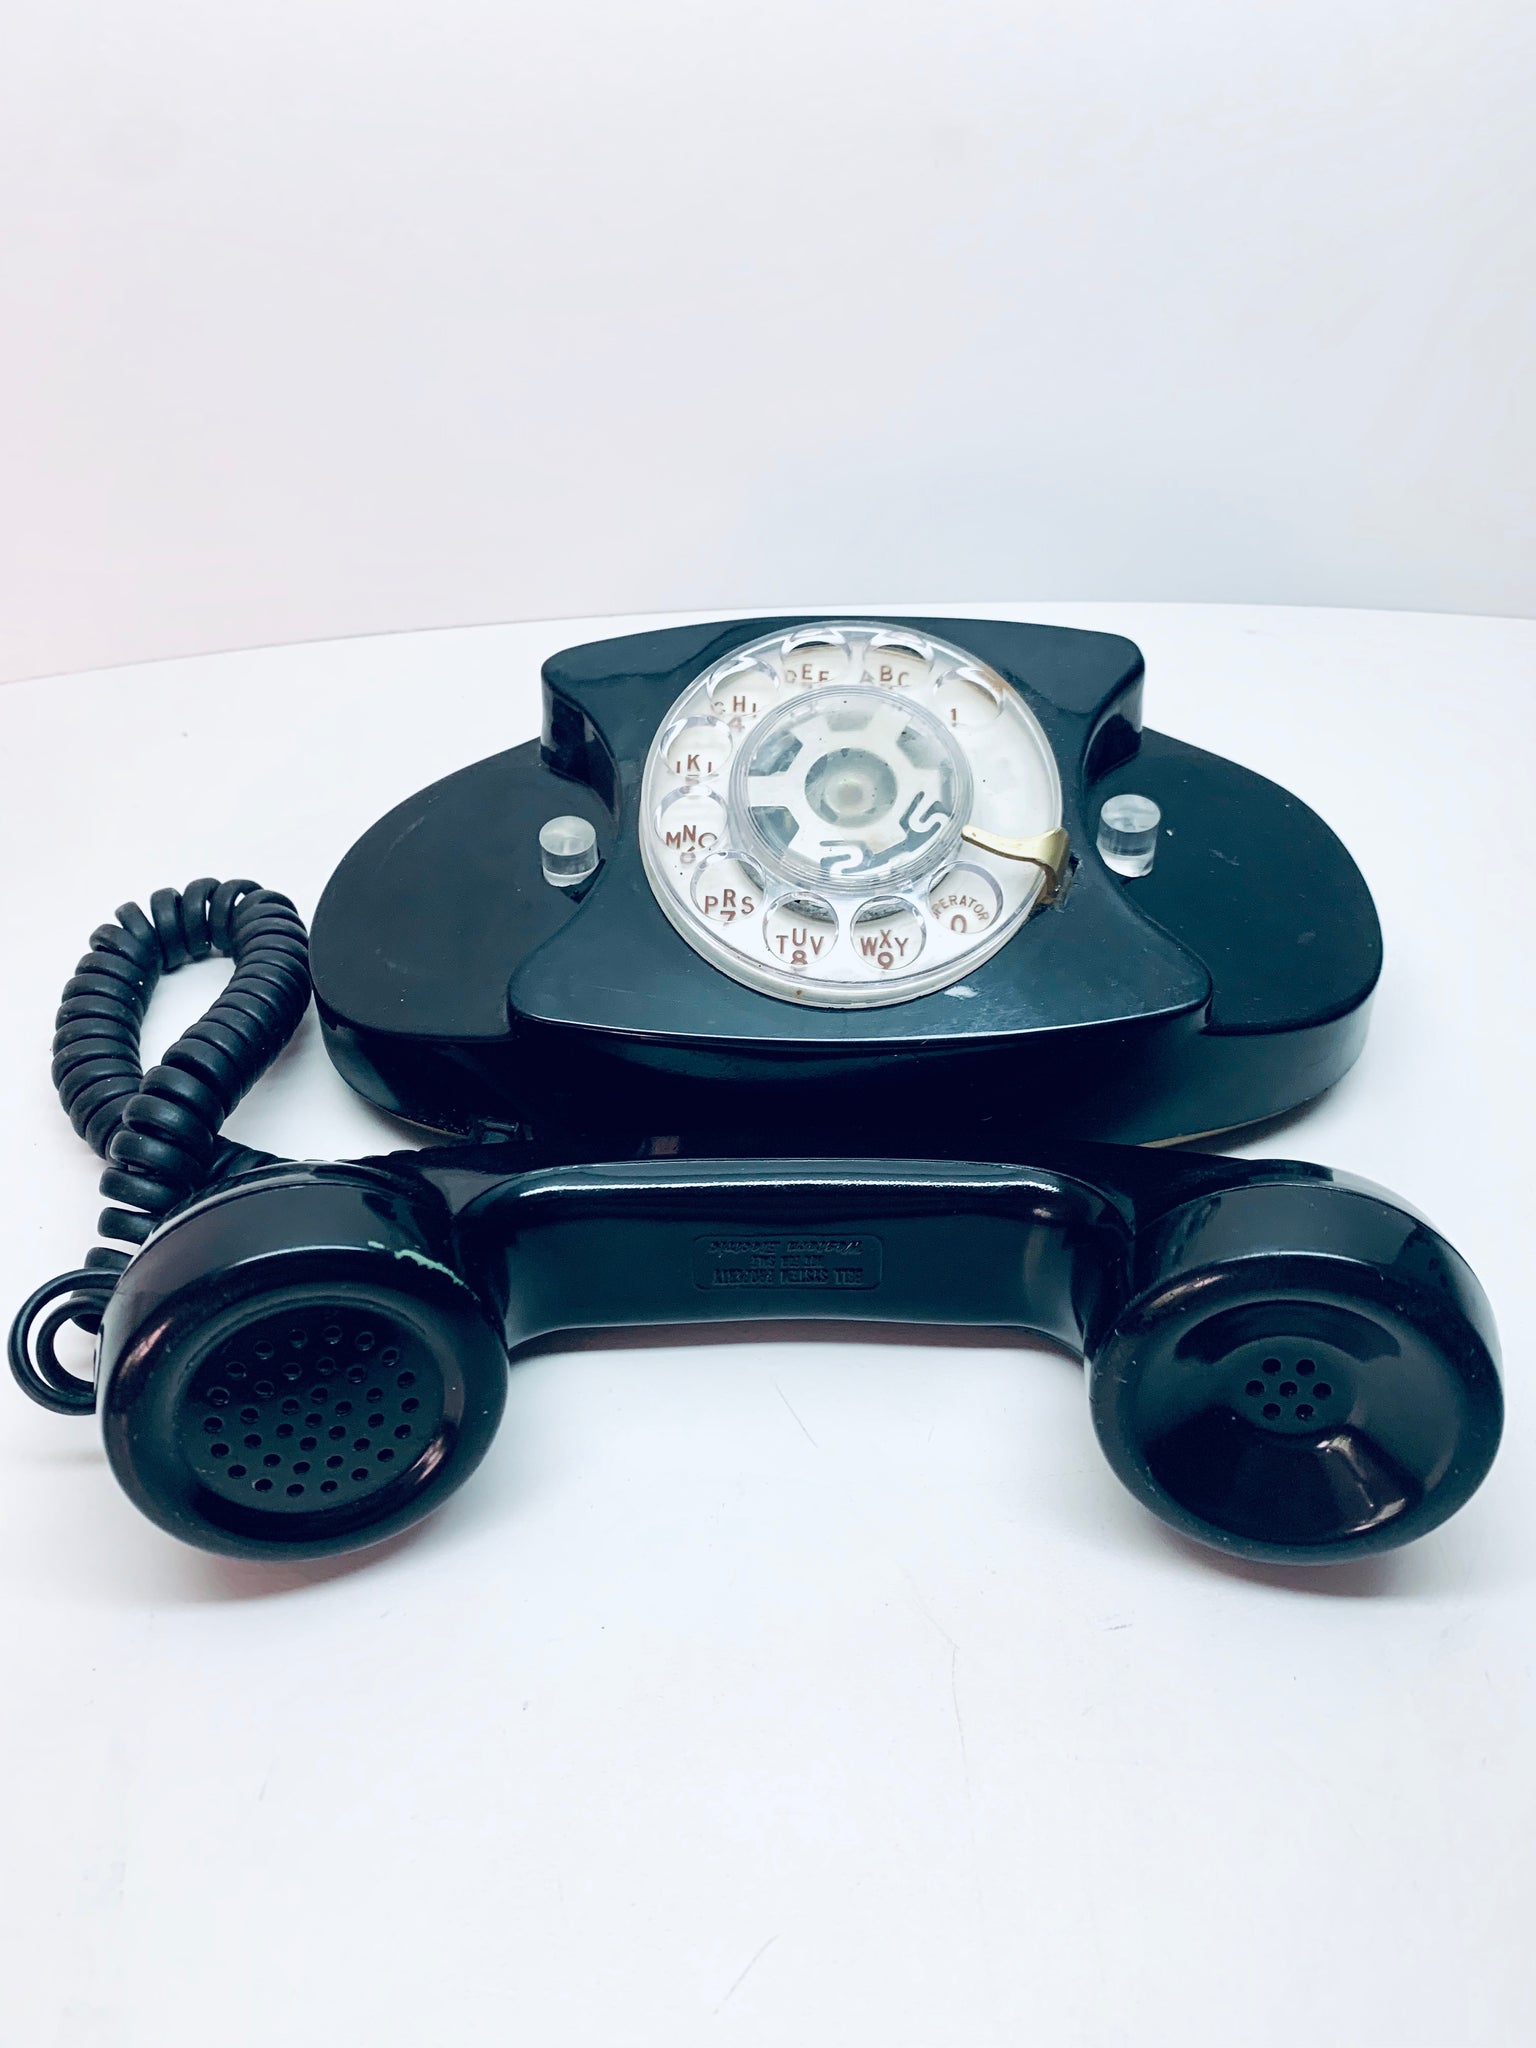 Black Dial Phone (no working)